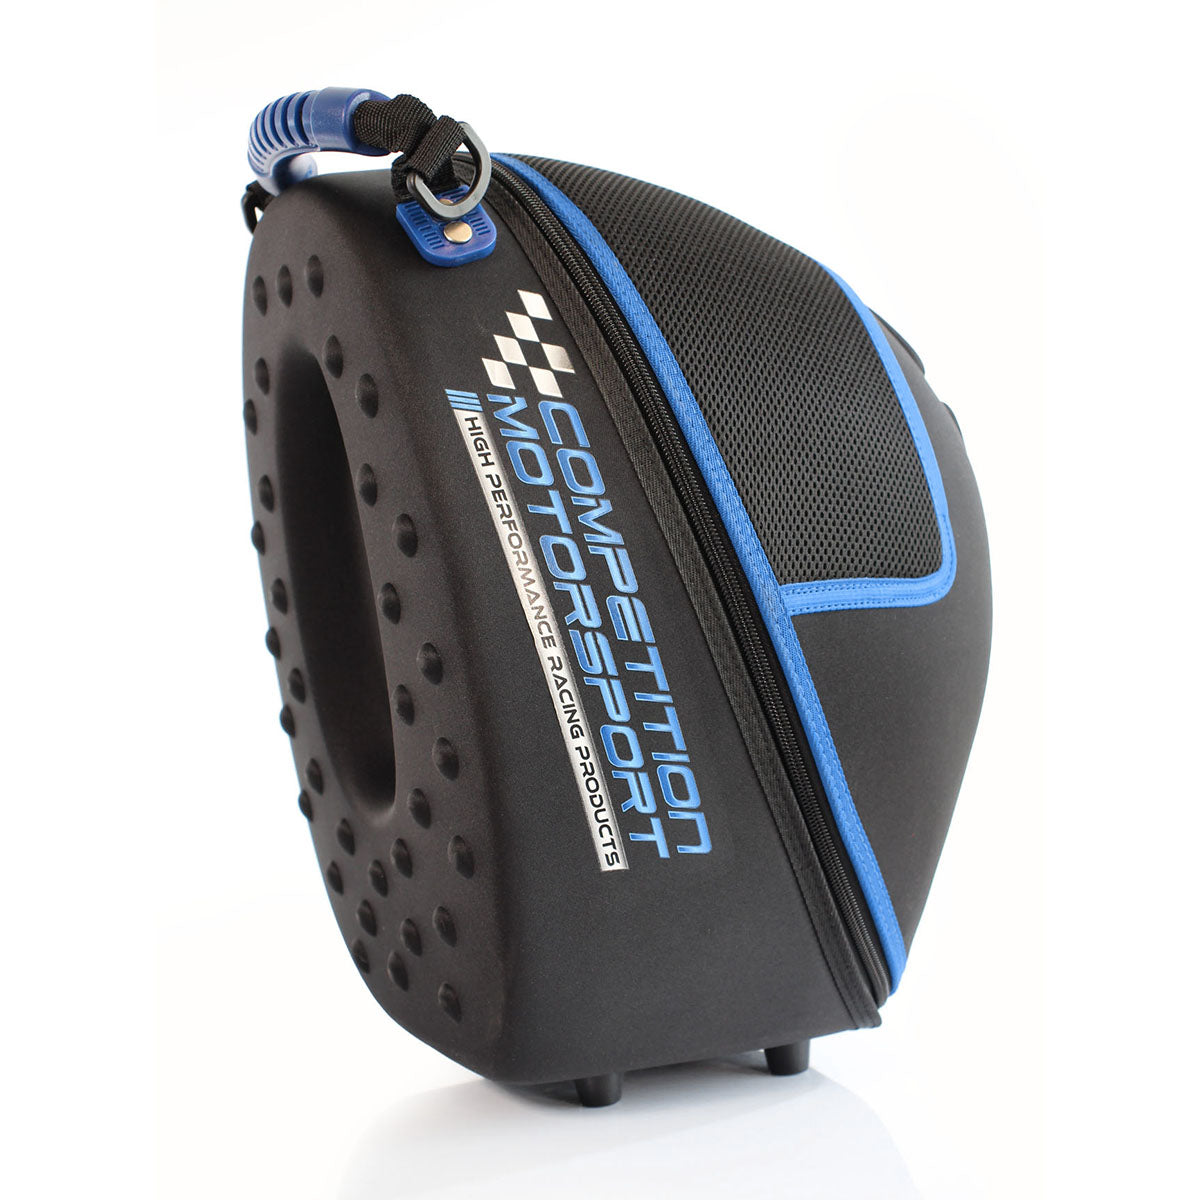 "Store Your Racing Helmet Safely with CMS Performance Bag"